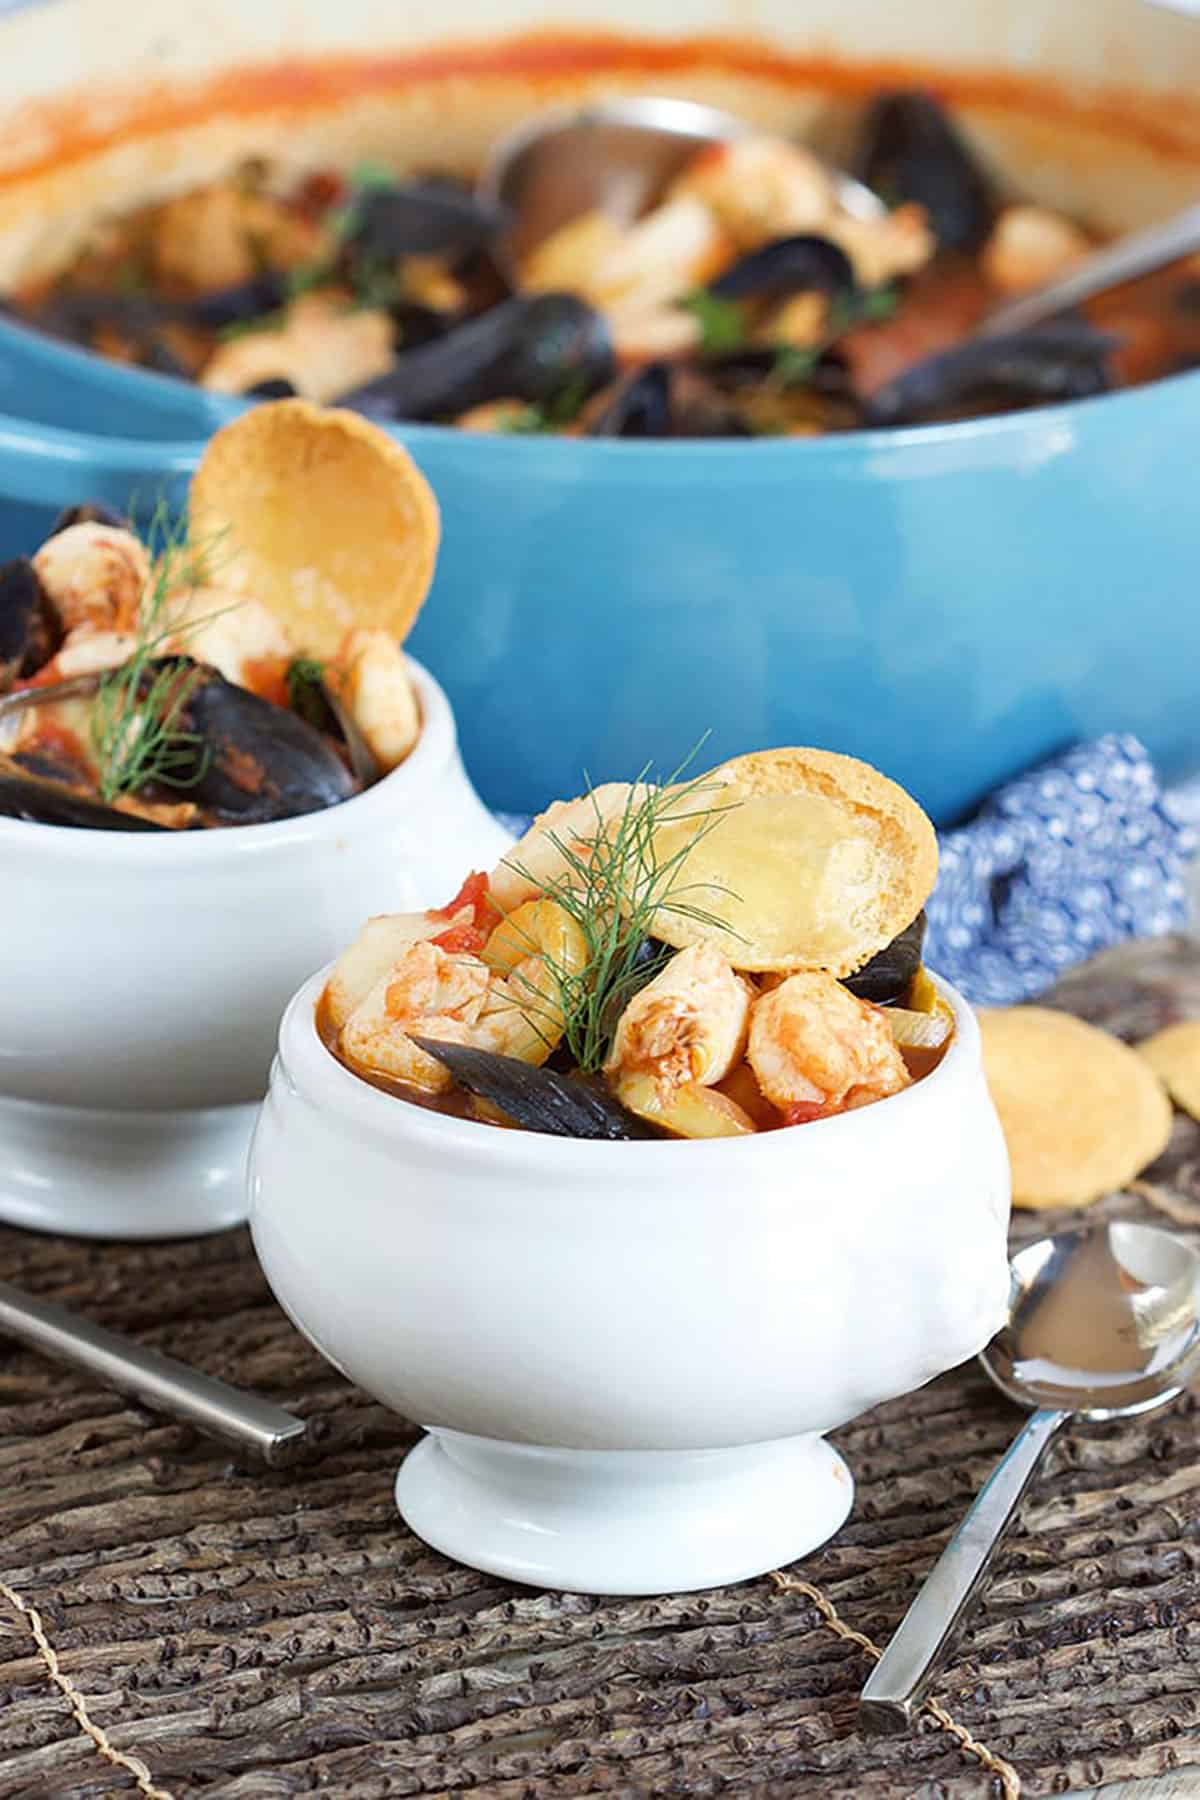 Bouillabaisse in a white footed bowl with a blue pot in the background.